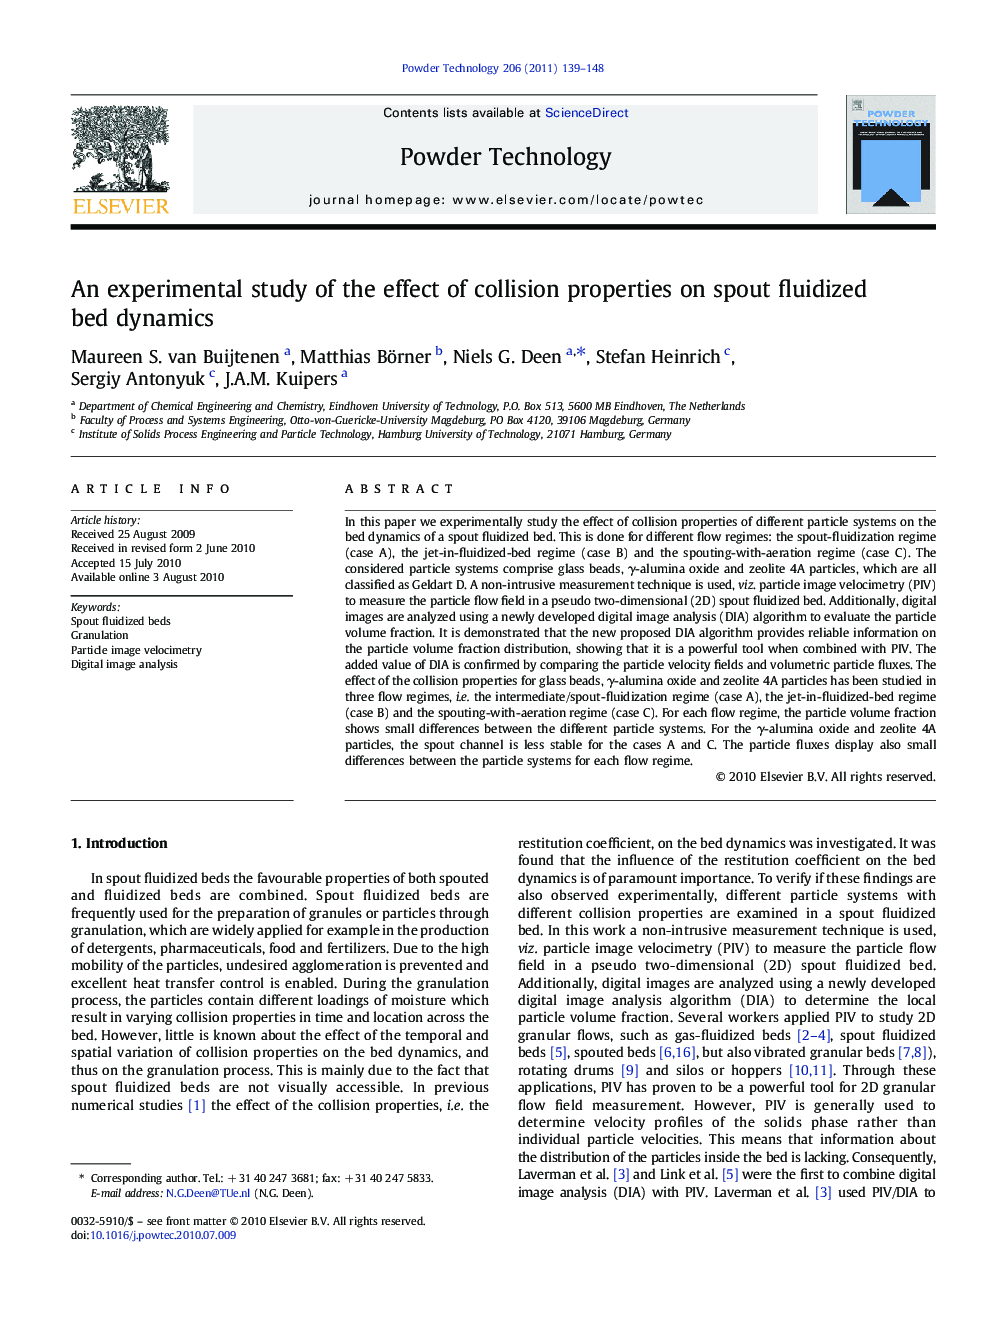 An experimental study of the effect of collision properties on spout fluidized bed dynamics